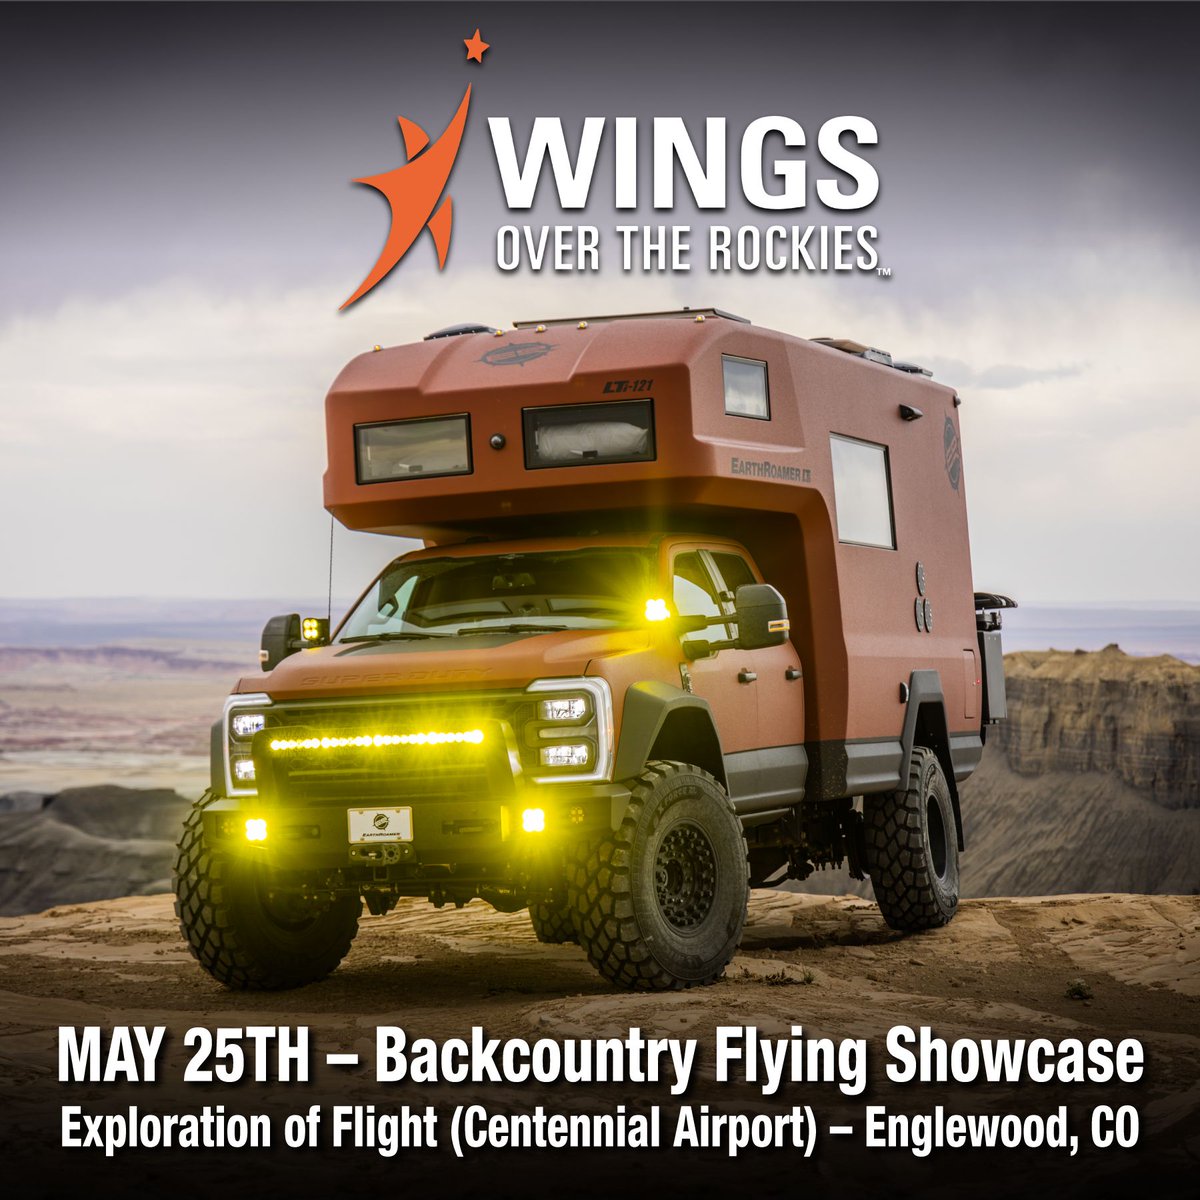 We'll be at the Backcountry Flying Showcase in Englewood, CO this Saturday! Come out and enjoy some backcountry flying and check out LTi in our booth! · · · #earthroamer #offroad4x4 #expeditionvehicle #campinglife #overlanding #4x4life #4x4trucks #vanlife #vanlifeadventures